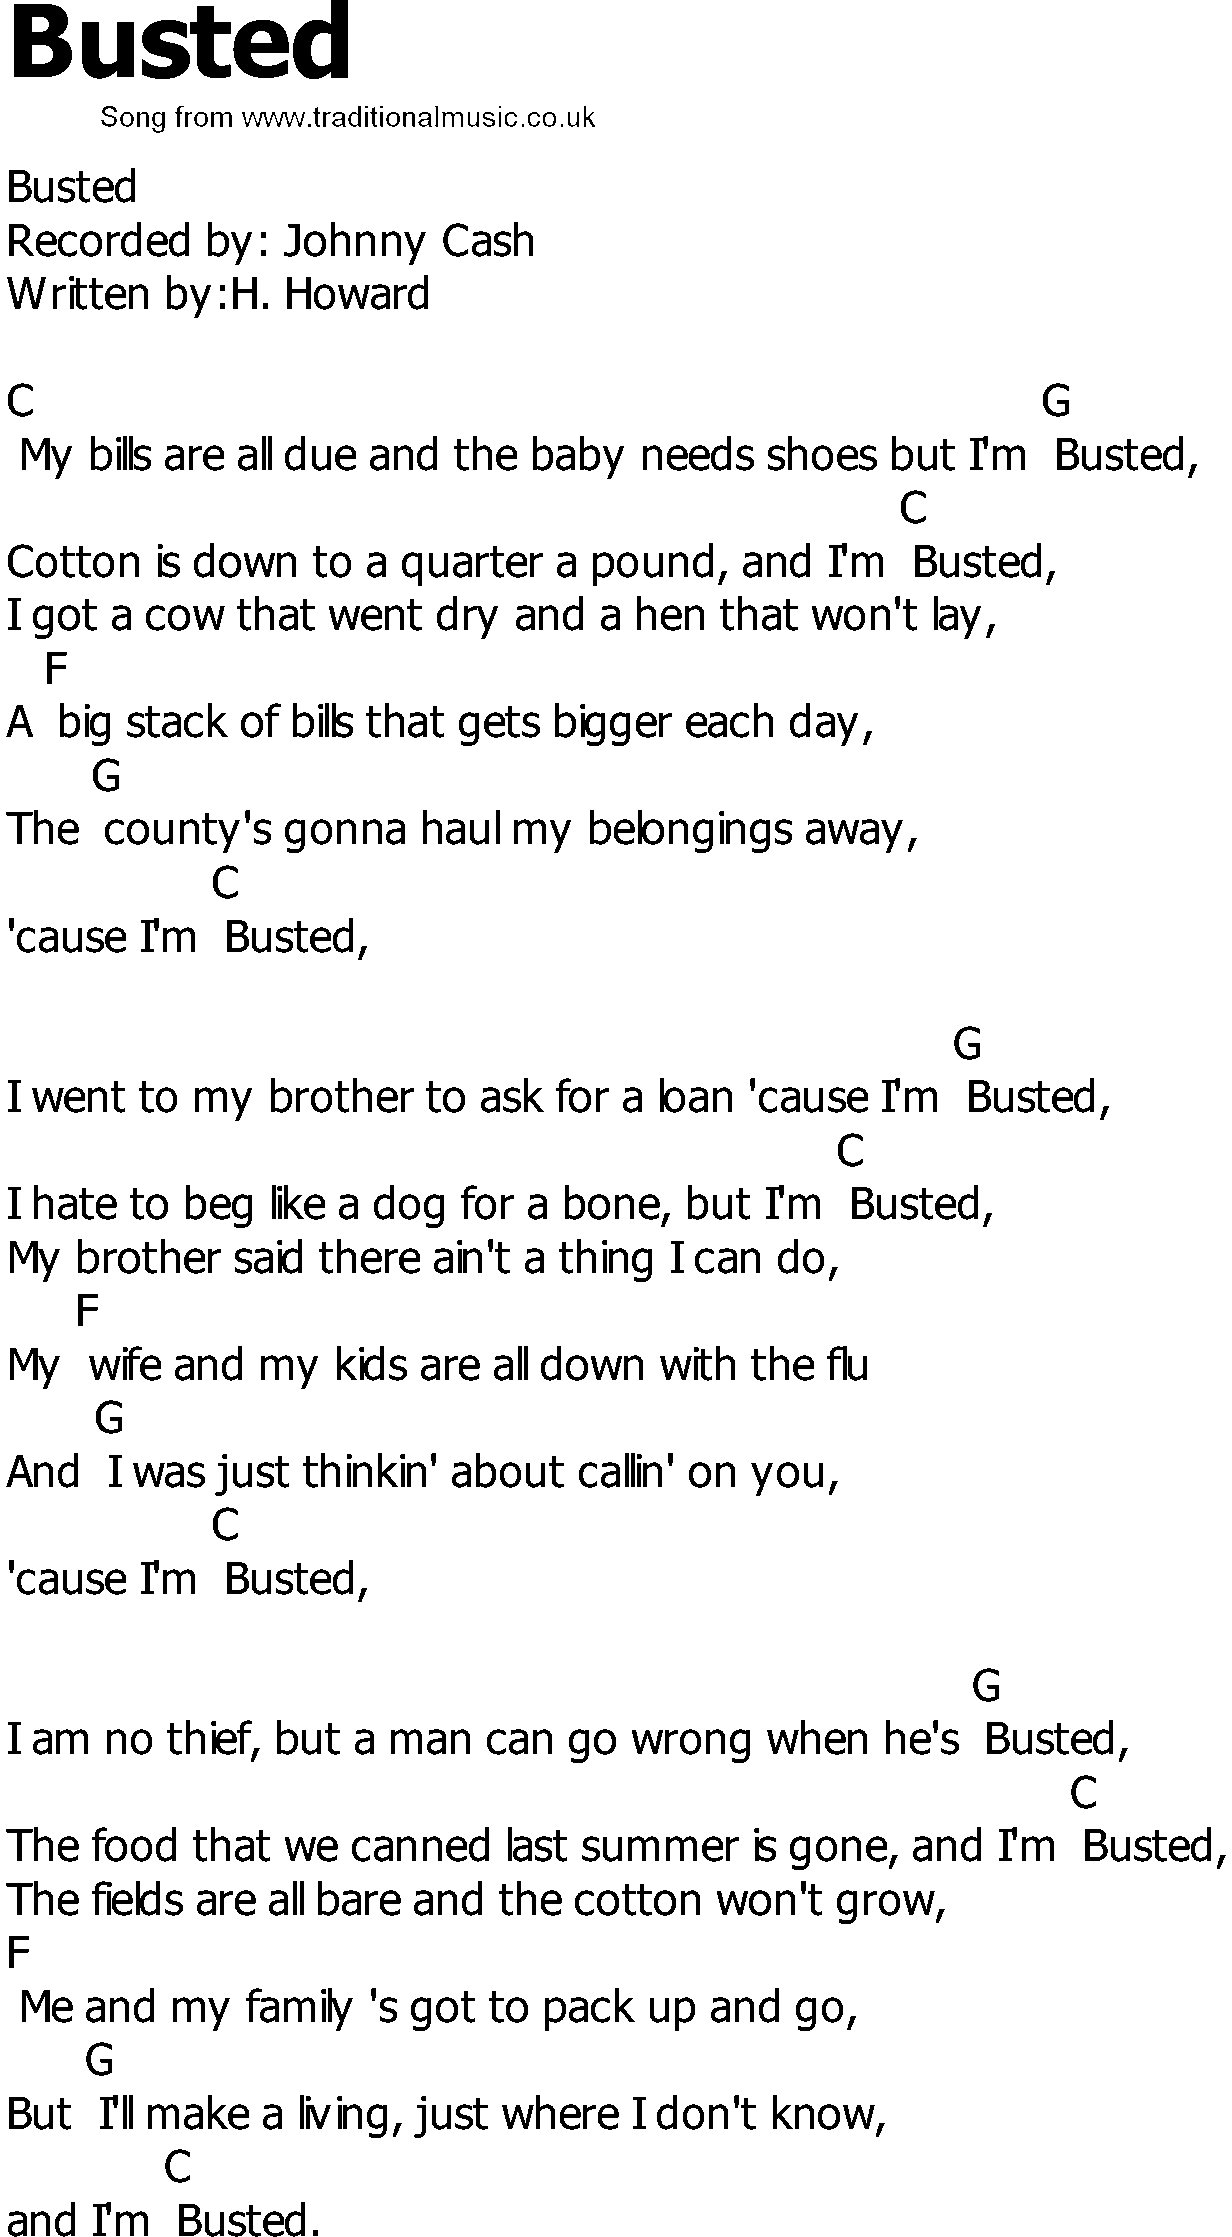 Old Country song lyrics with chords - Busted